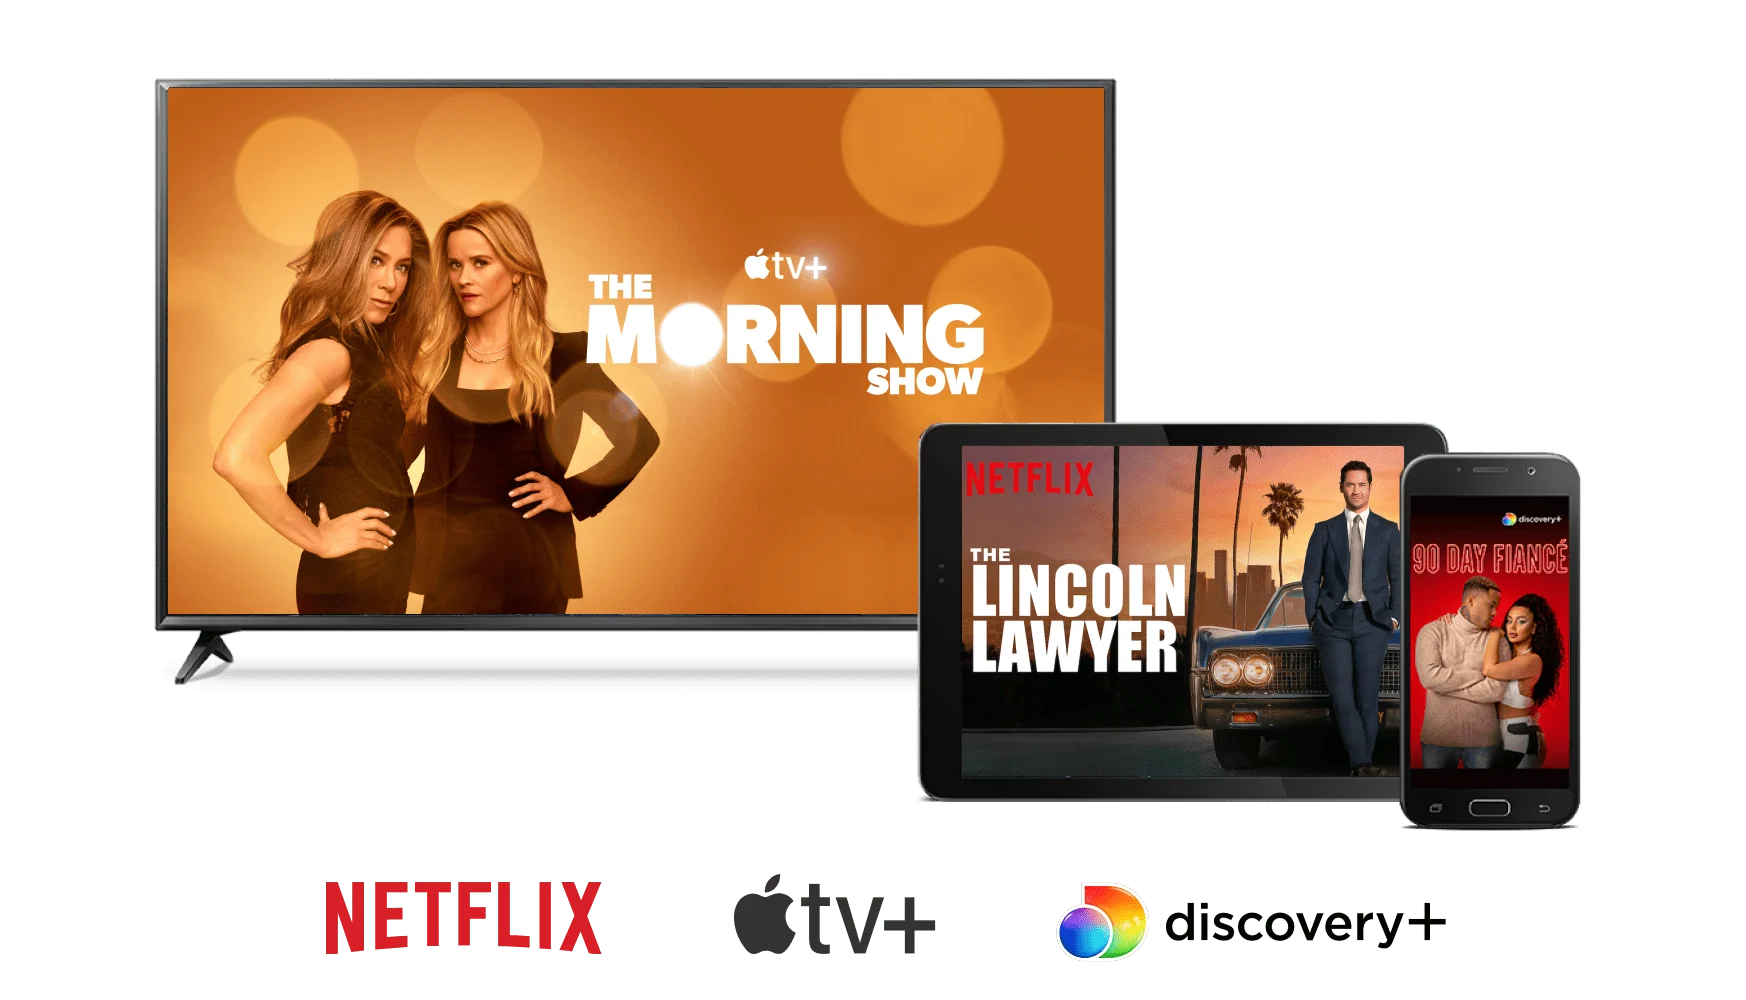 Devices show The Morning Show, The Lincoln Lawyer, and 90 Day Fiancé. Logos of Apple TV+, Netflix, and discovery+